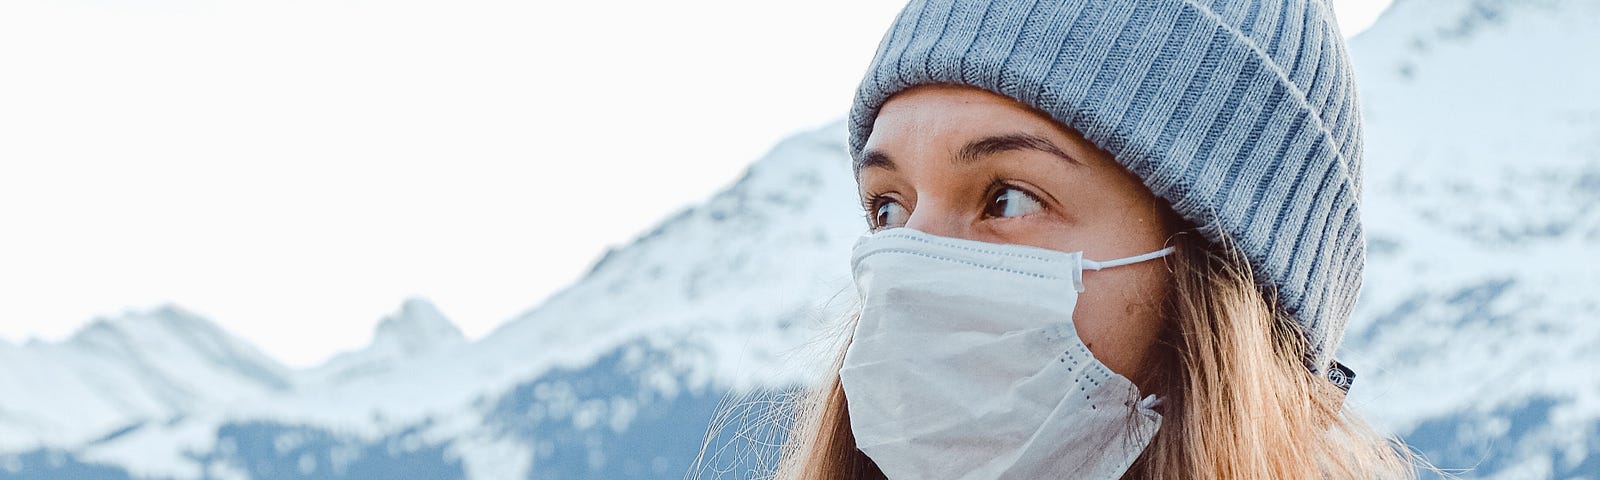 Woman wearing a mask outdoors with a snowy mountain behind her